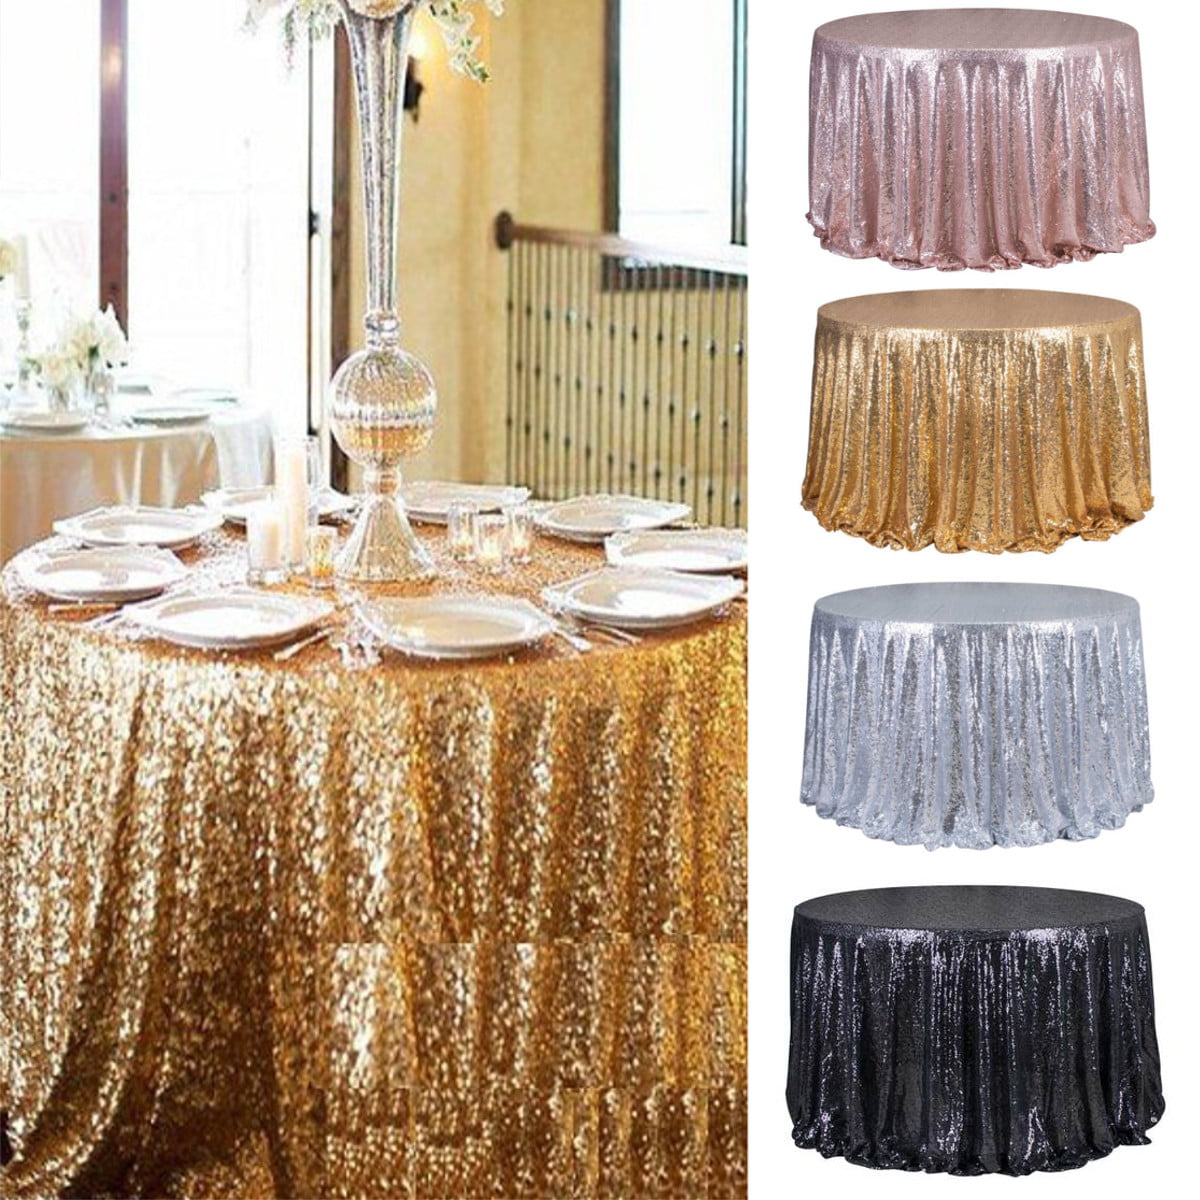 Round Sequin Glitter Tablecloth Sparkly Table Cloth Cover Wedding Party Decor US 